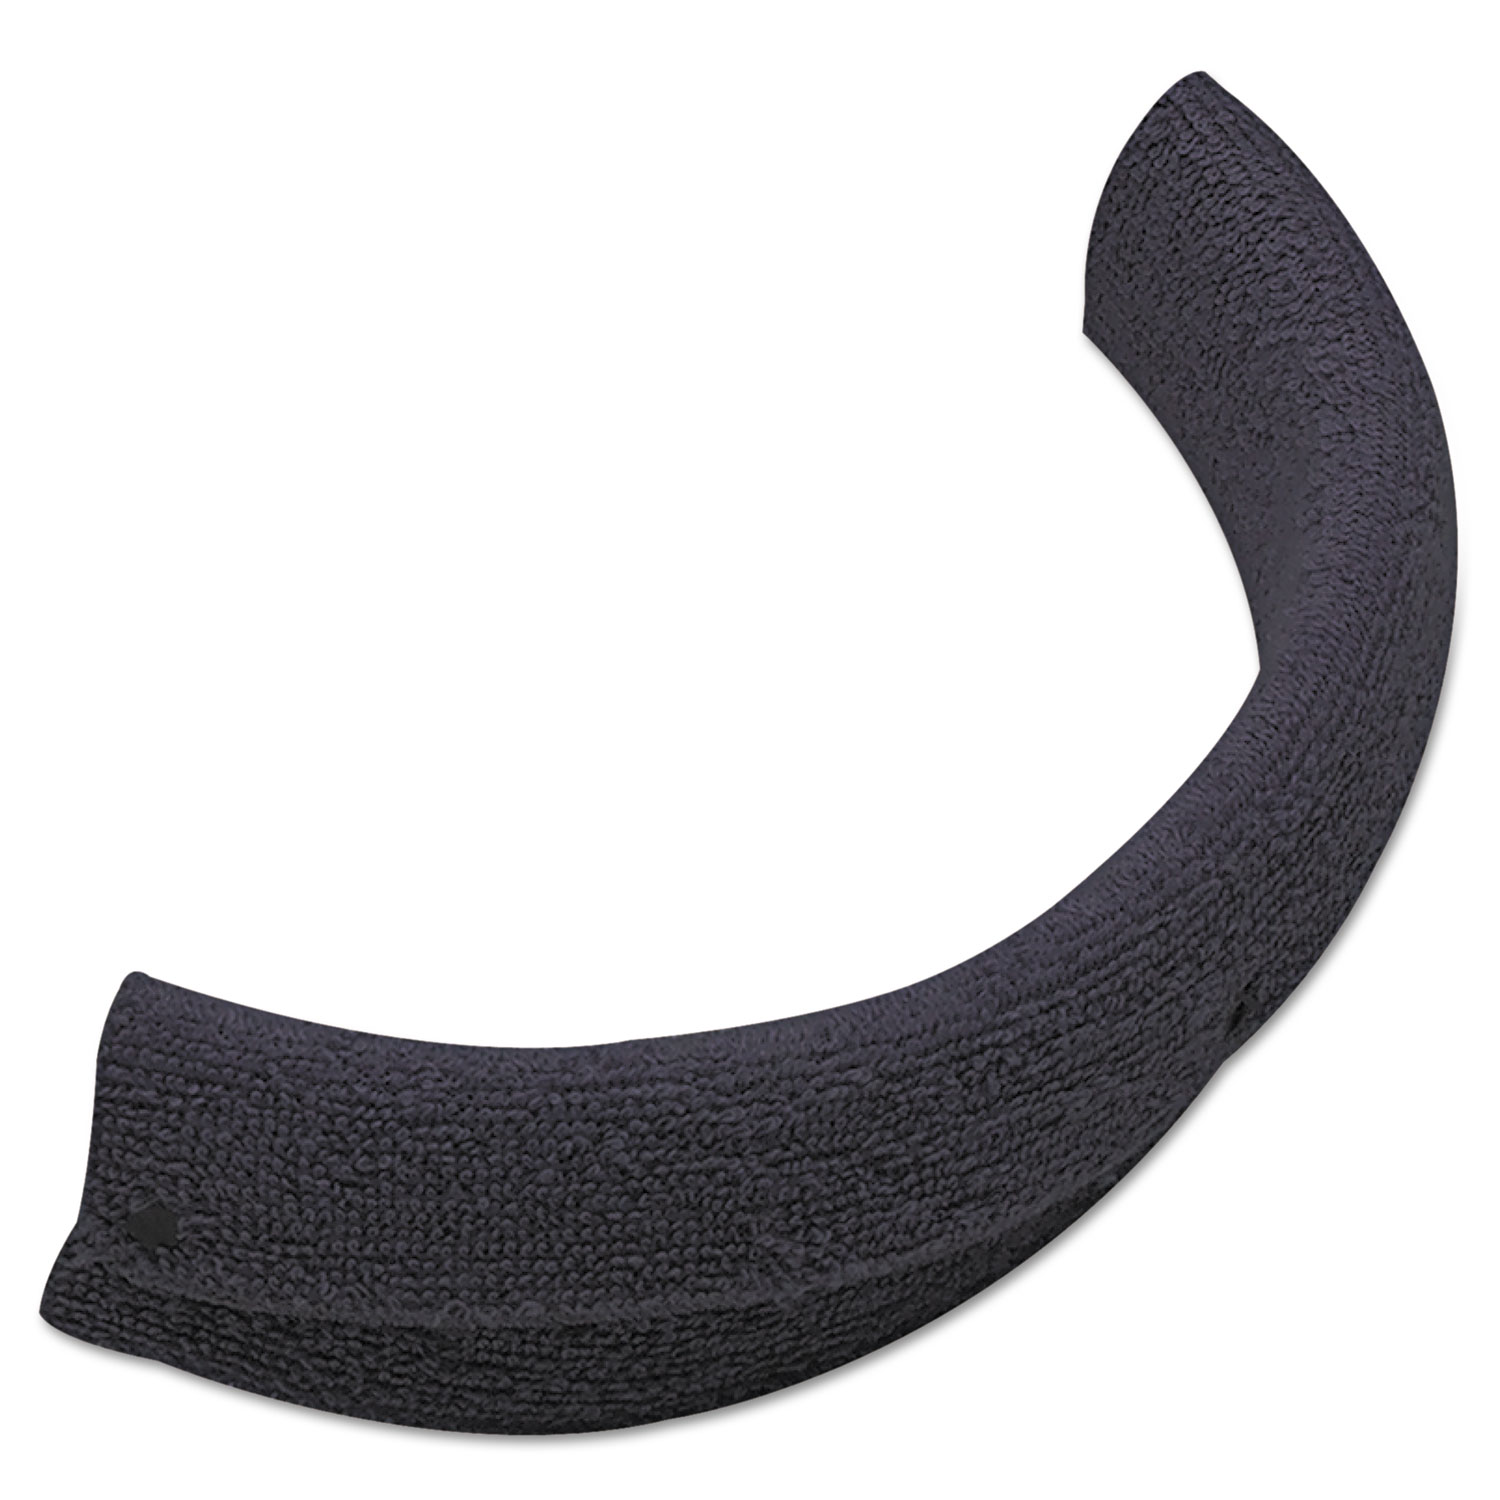 Replacement Sweatband, One Size Fits All